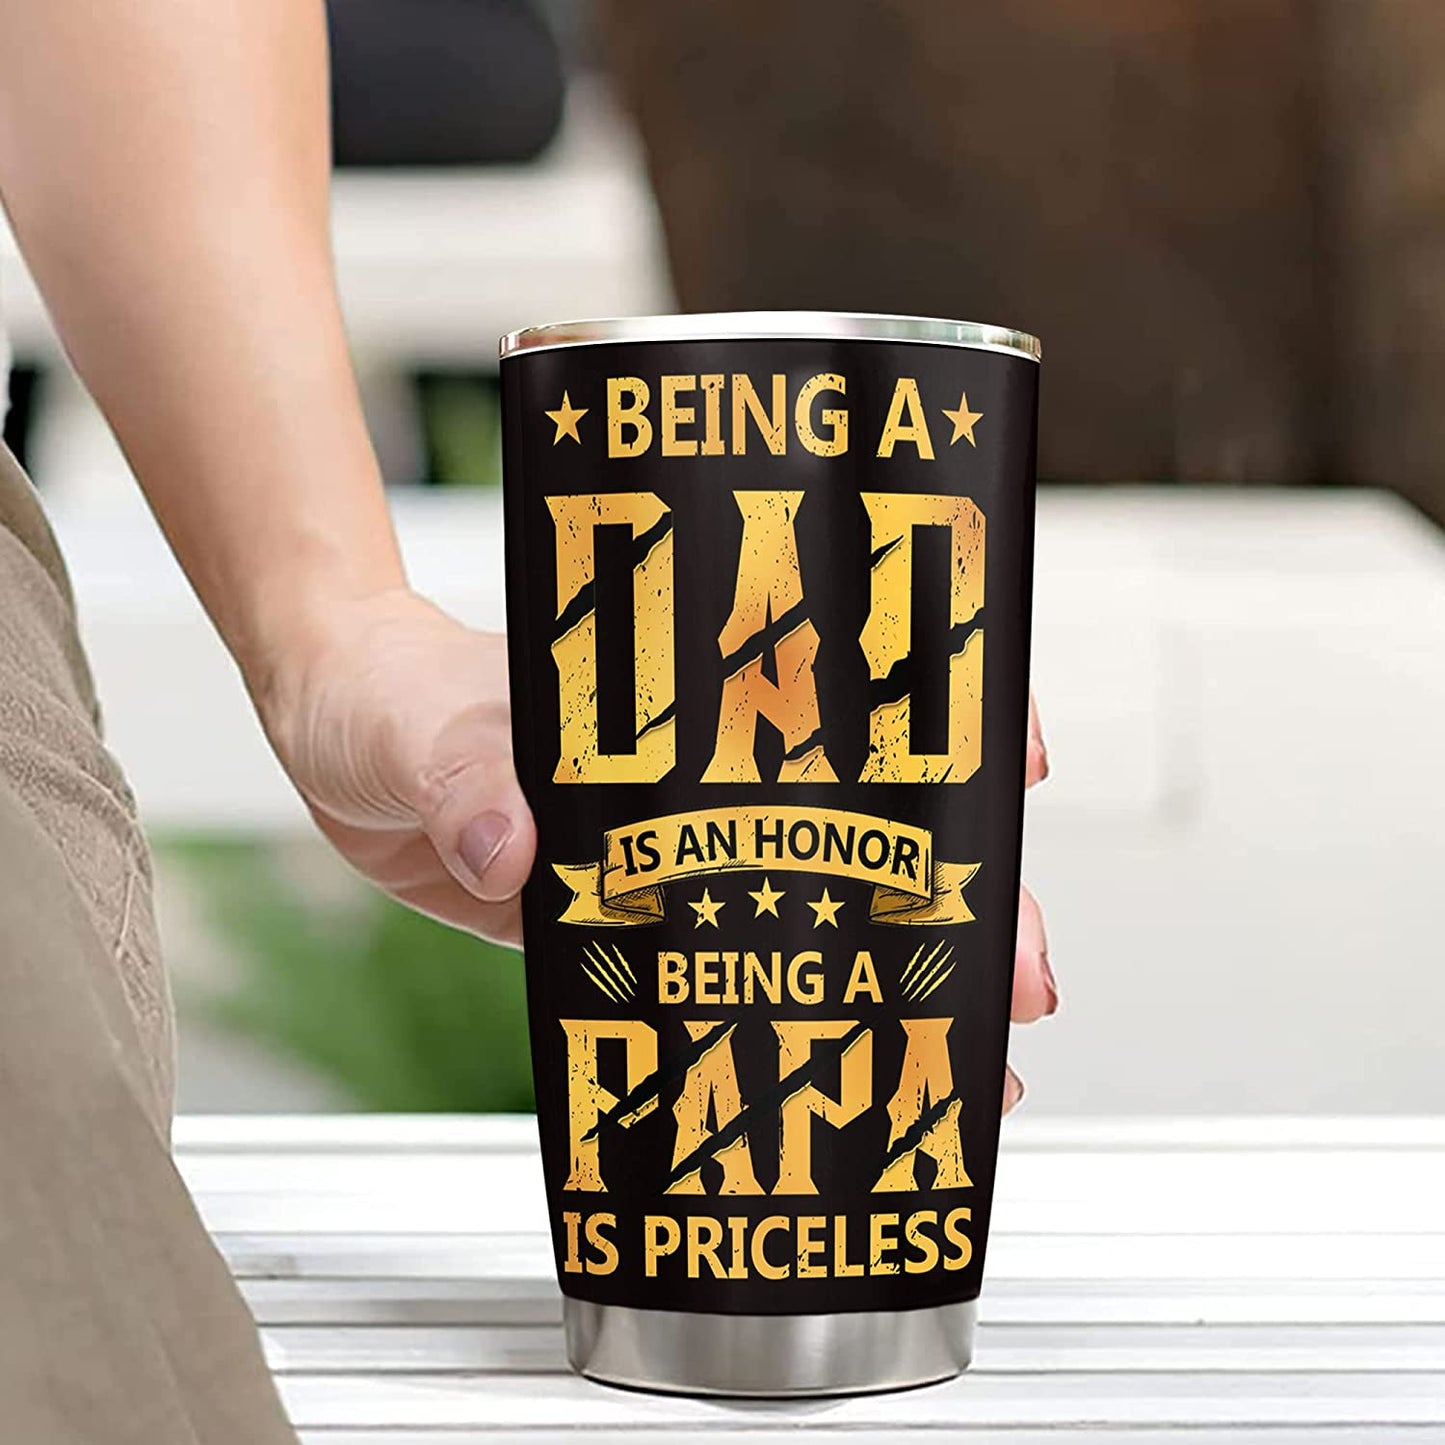 Papa Bear Tumbler - Great Fathers Day Gift - Best Dad Stainless Steel Coffee Tumbler 20oz For New/Step/Bonus Dad - Birthday, Christmas, Fathers Day Gift Ideas From Daughter Or Son Novelty Cups